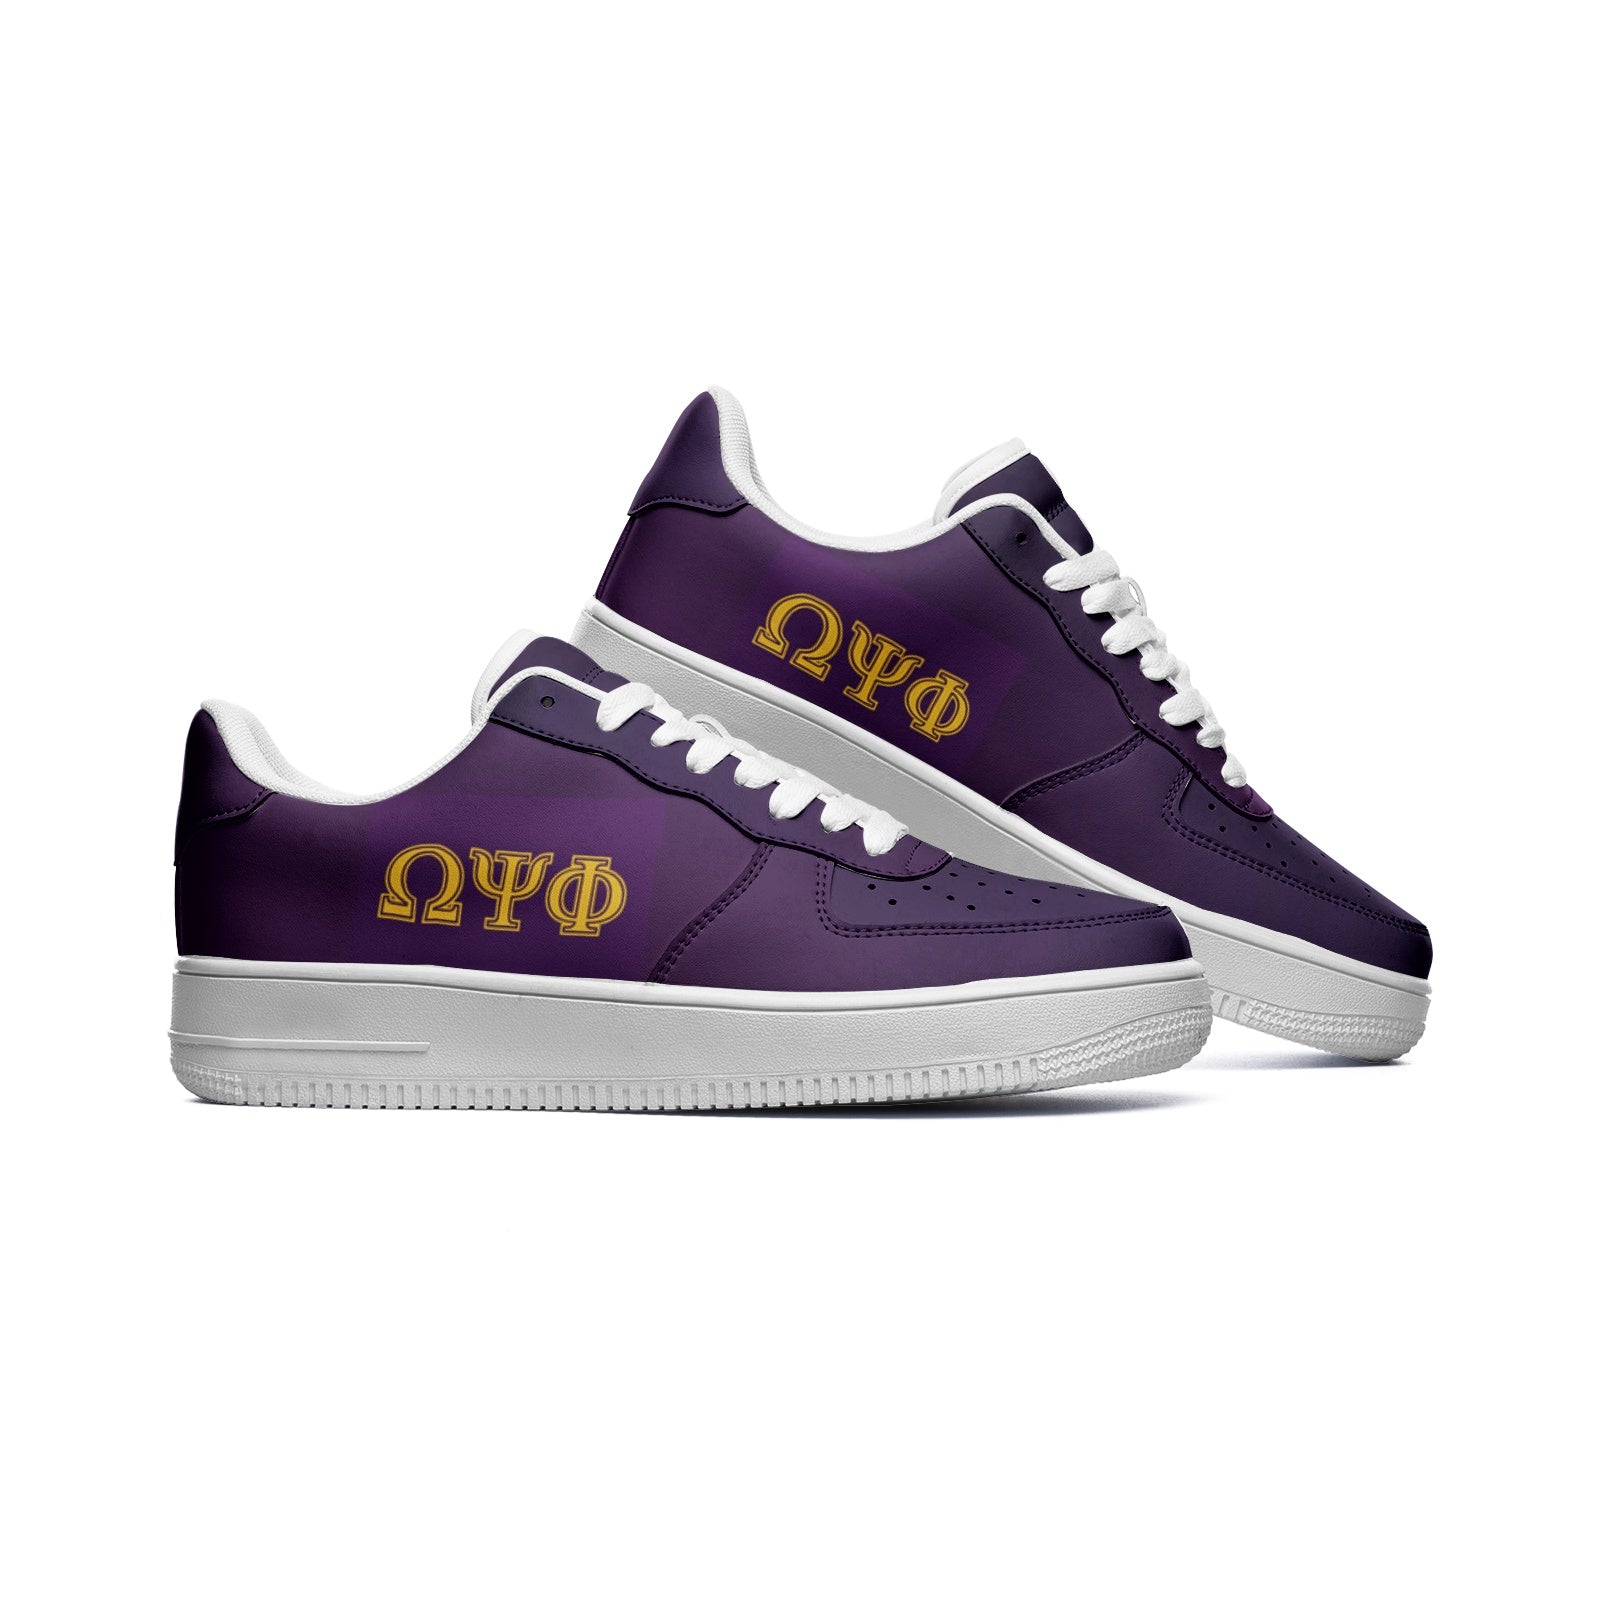 Omega Psi Phi Low Top Leather Sneakers